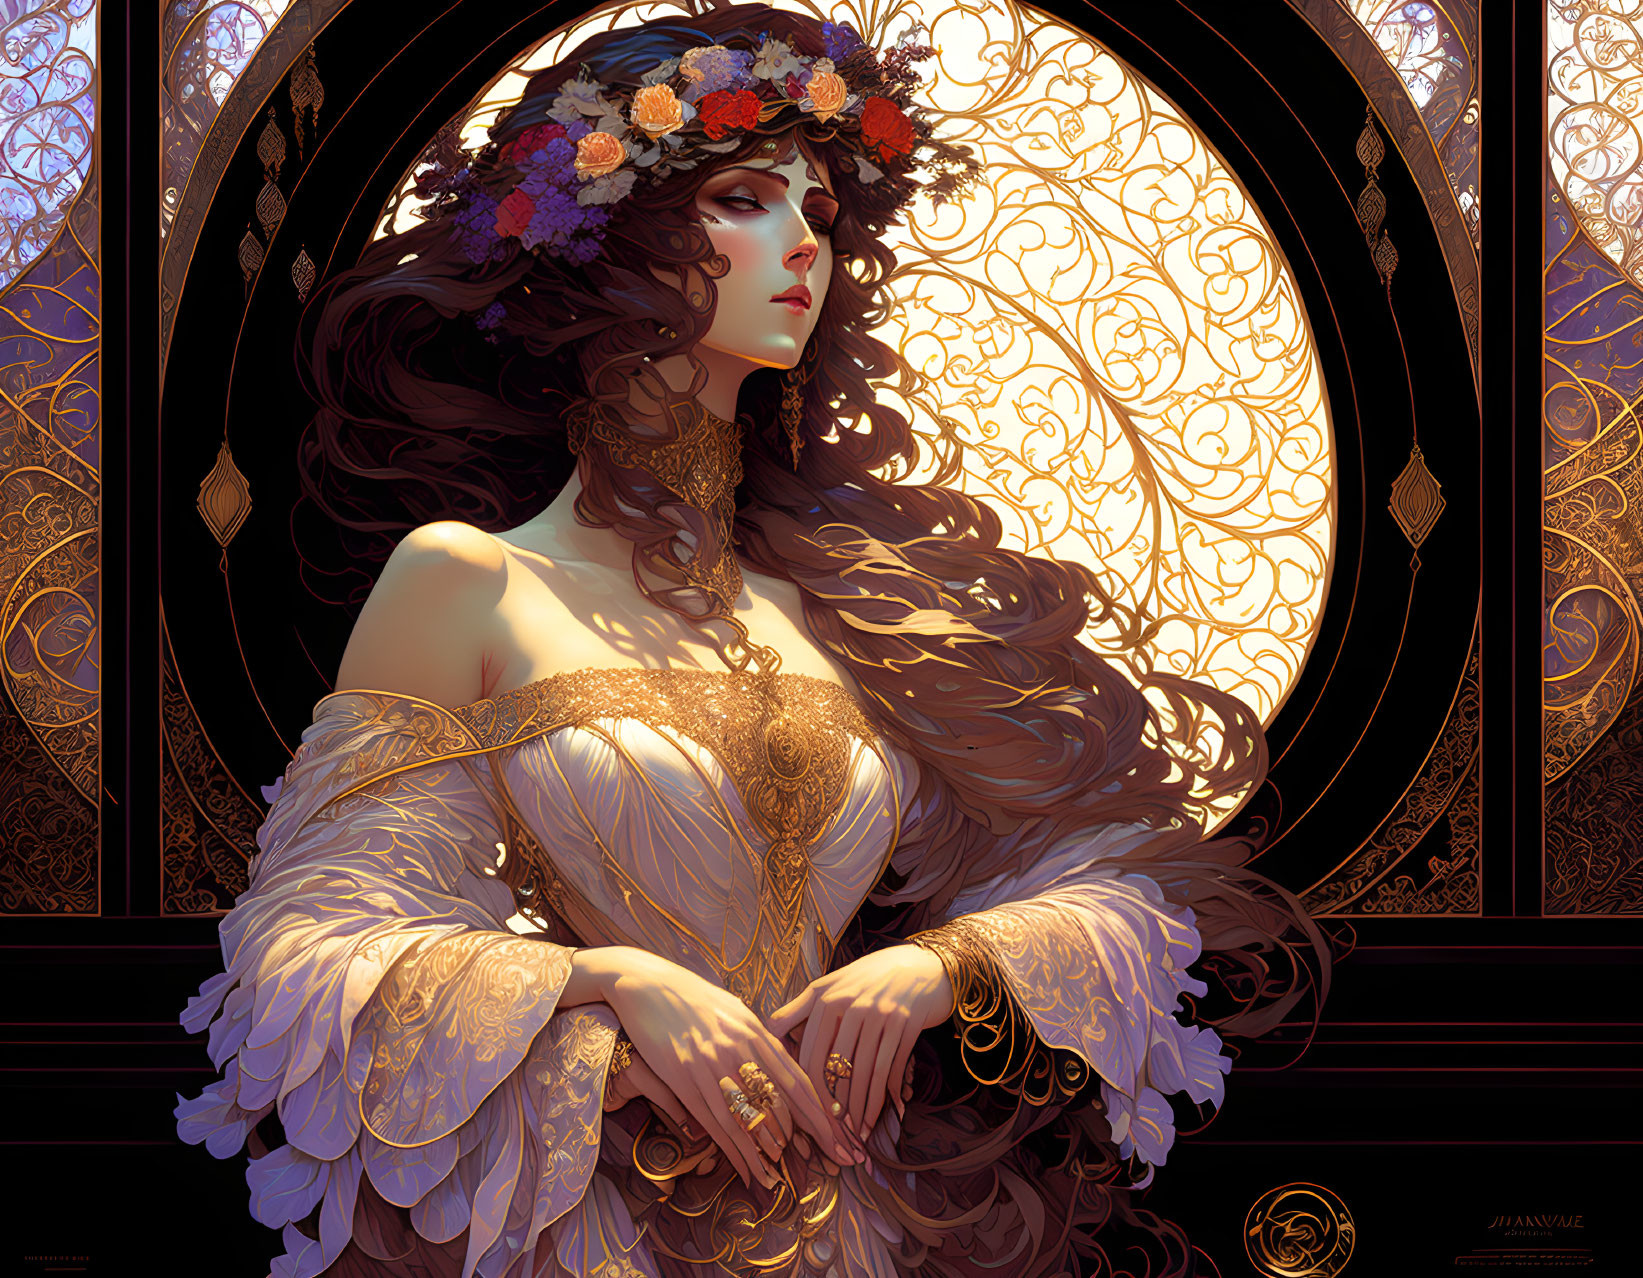 Elegant Woman with Floral Crown and Golden Patterns